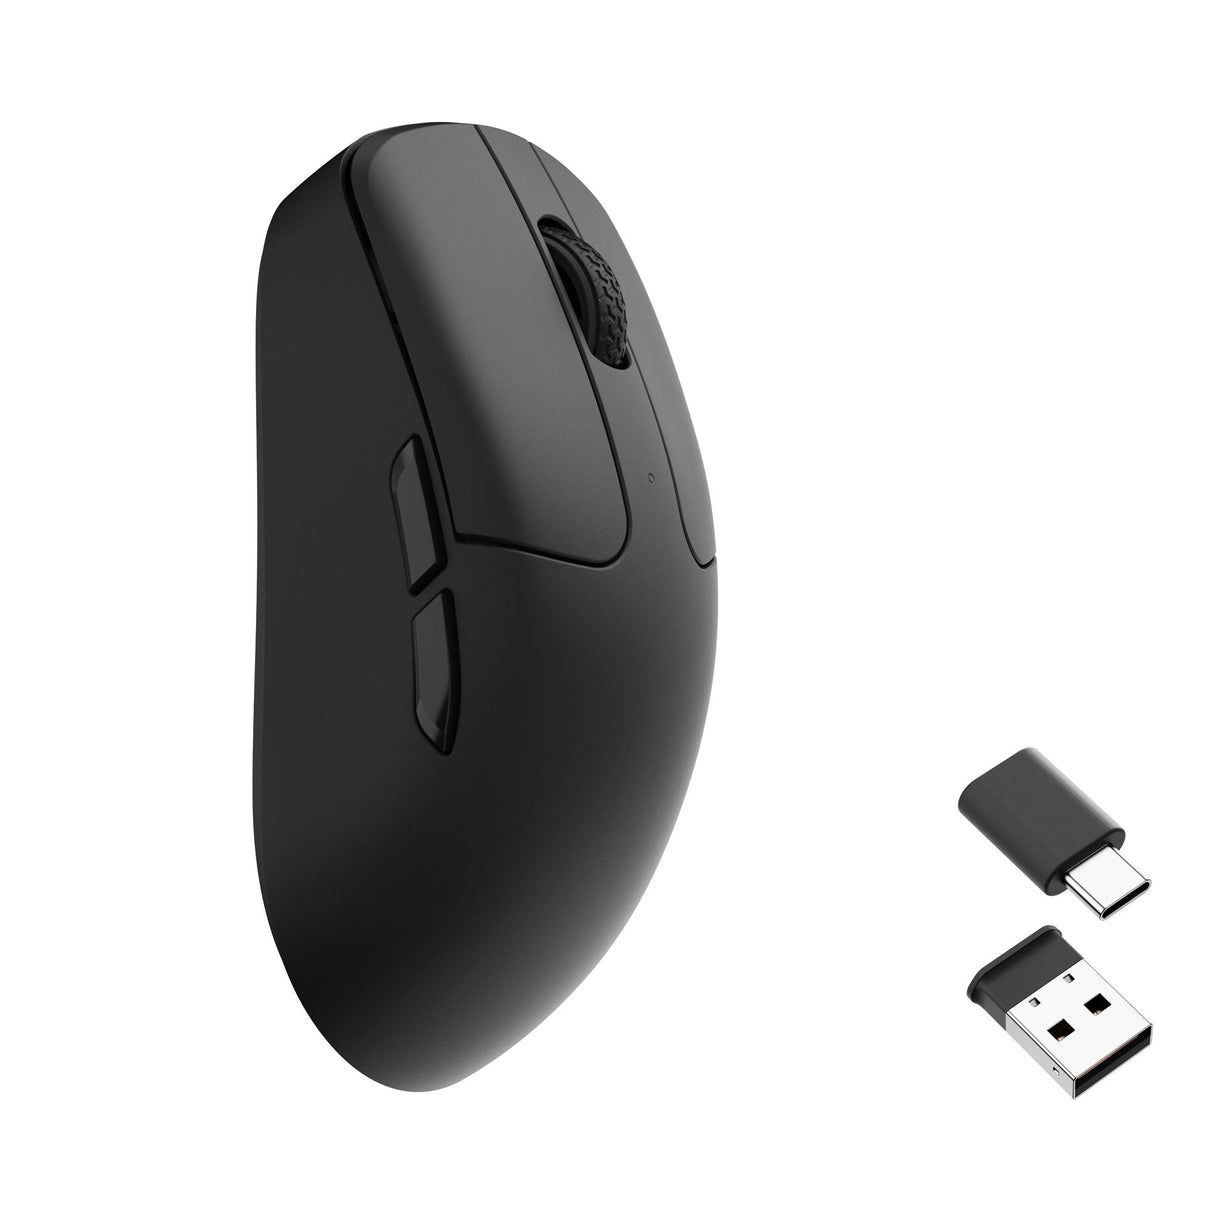 Keychron M2 Wireless Mouse with 2.4 GHz Receivers-Black Version